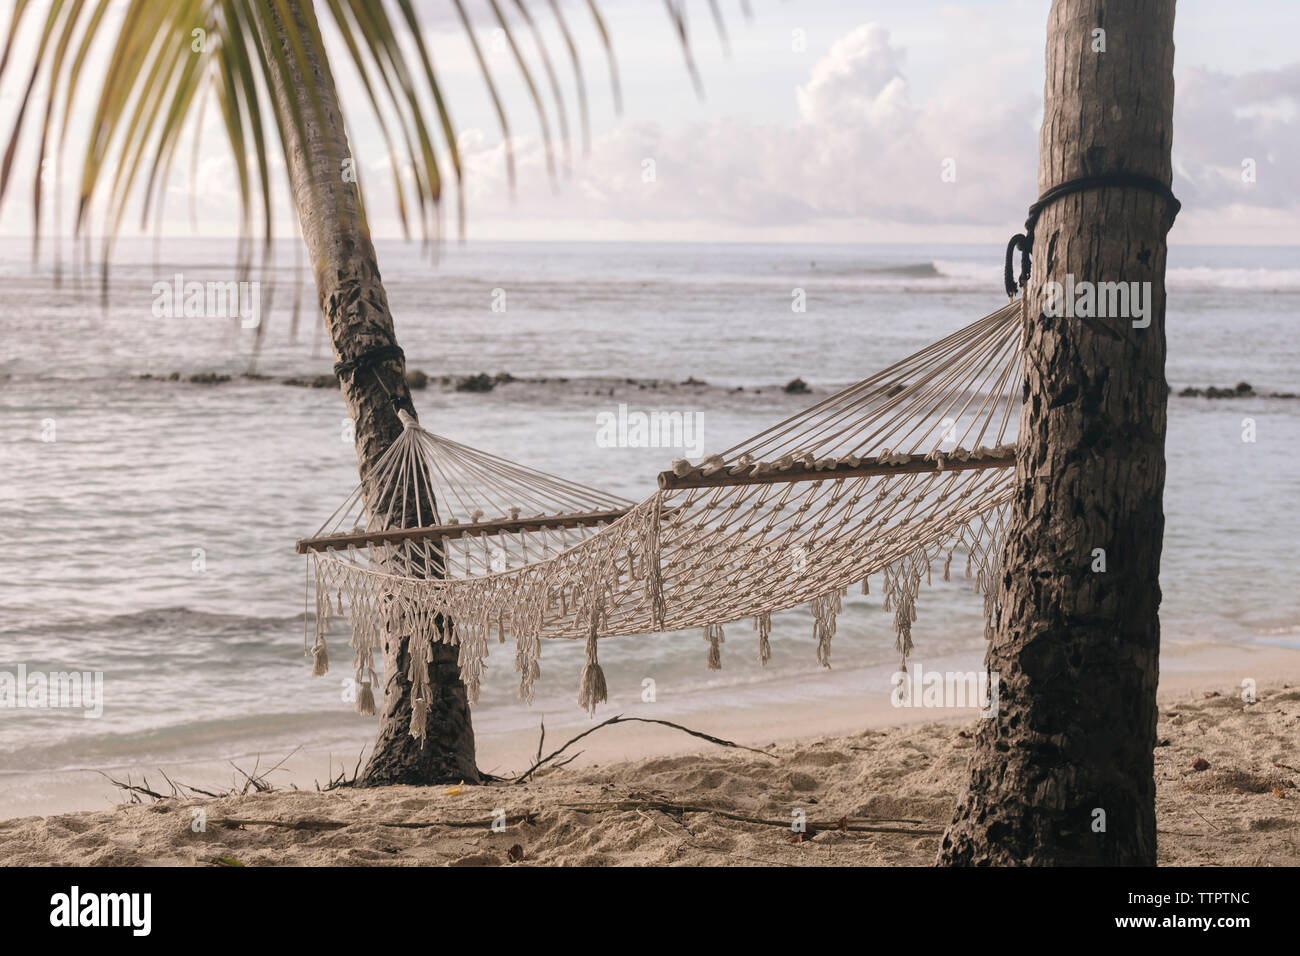 Hammock hanging on palm trees at beach against sky Stock Photo - Alamy